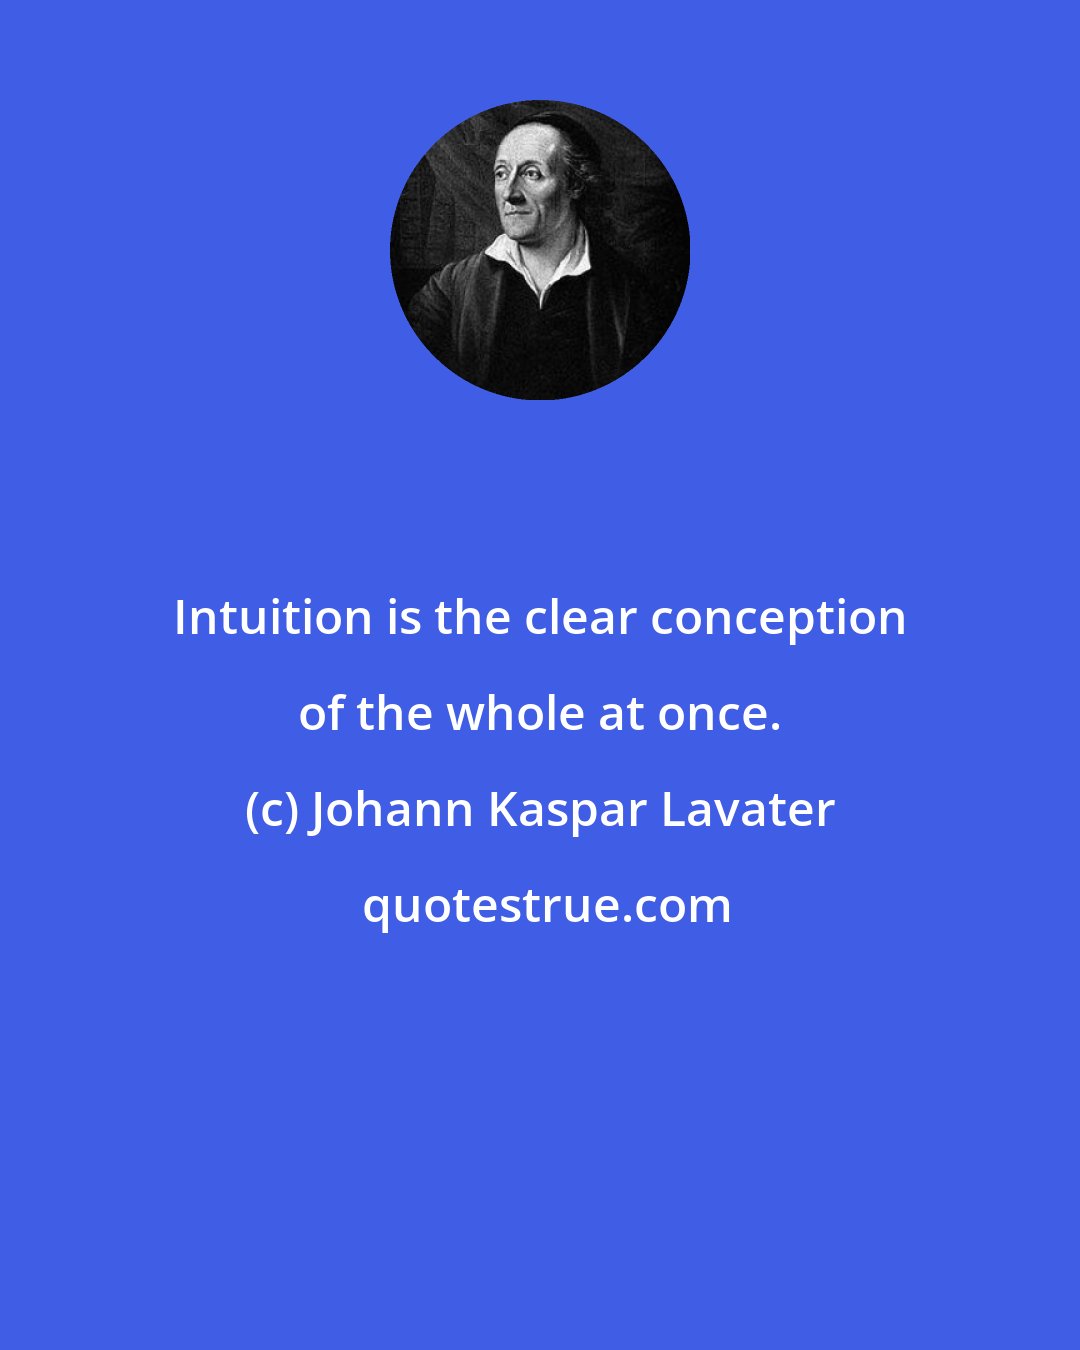 Johann Kaspar Lavater: Intuition is the clear conception of the whole at once.